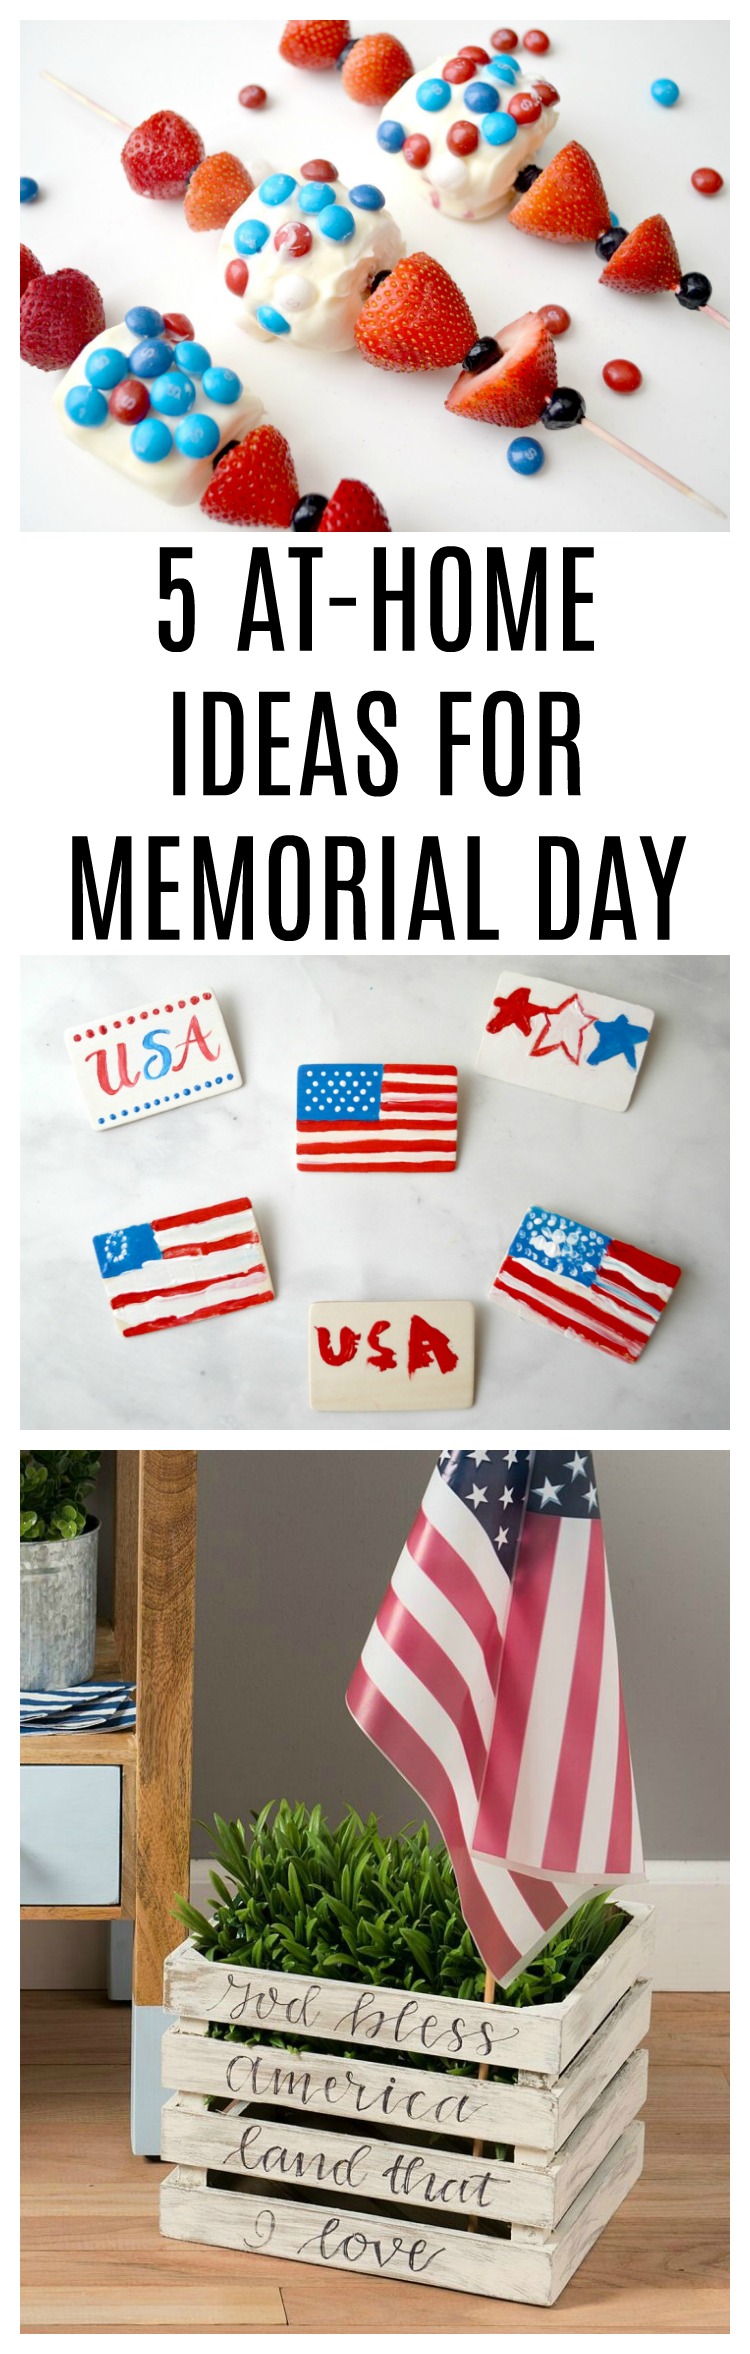 5 At-Home Ideas for Memorial Day